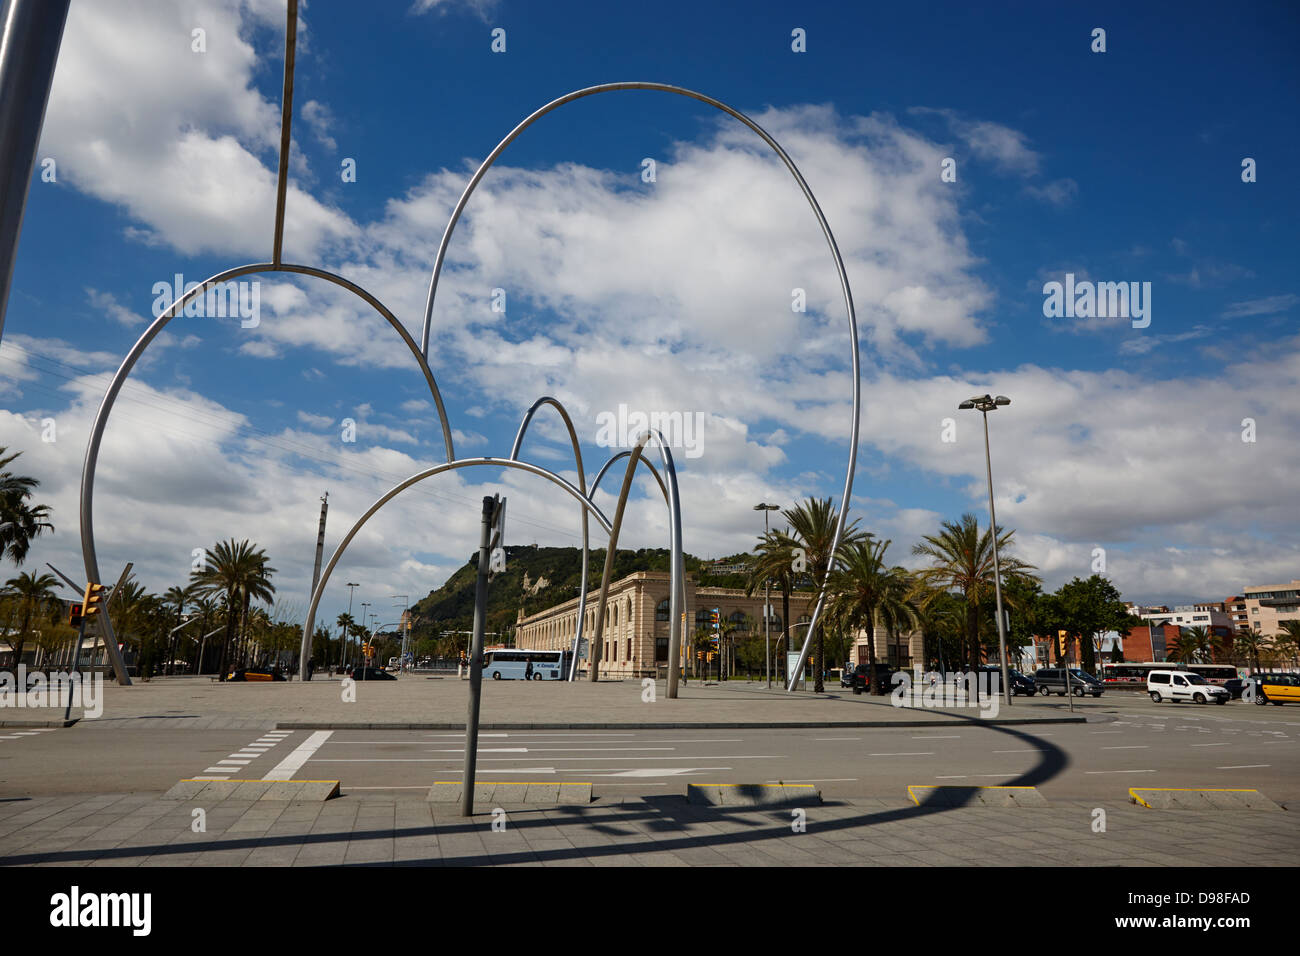 olas de acero steel waves sculpture by andreu alfaro at the entance to port vell barcelona catalonia spain Stock Photo